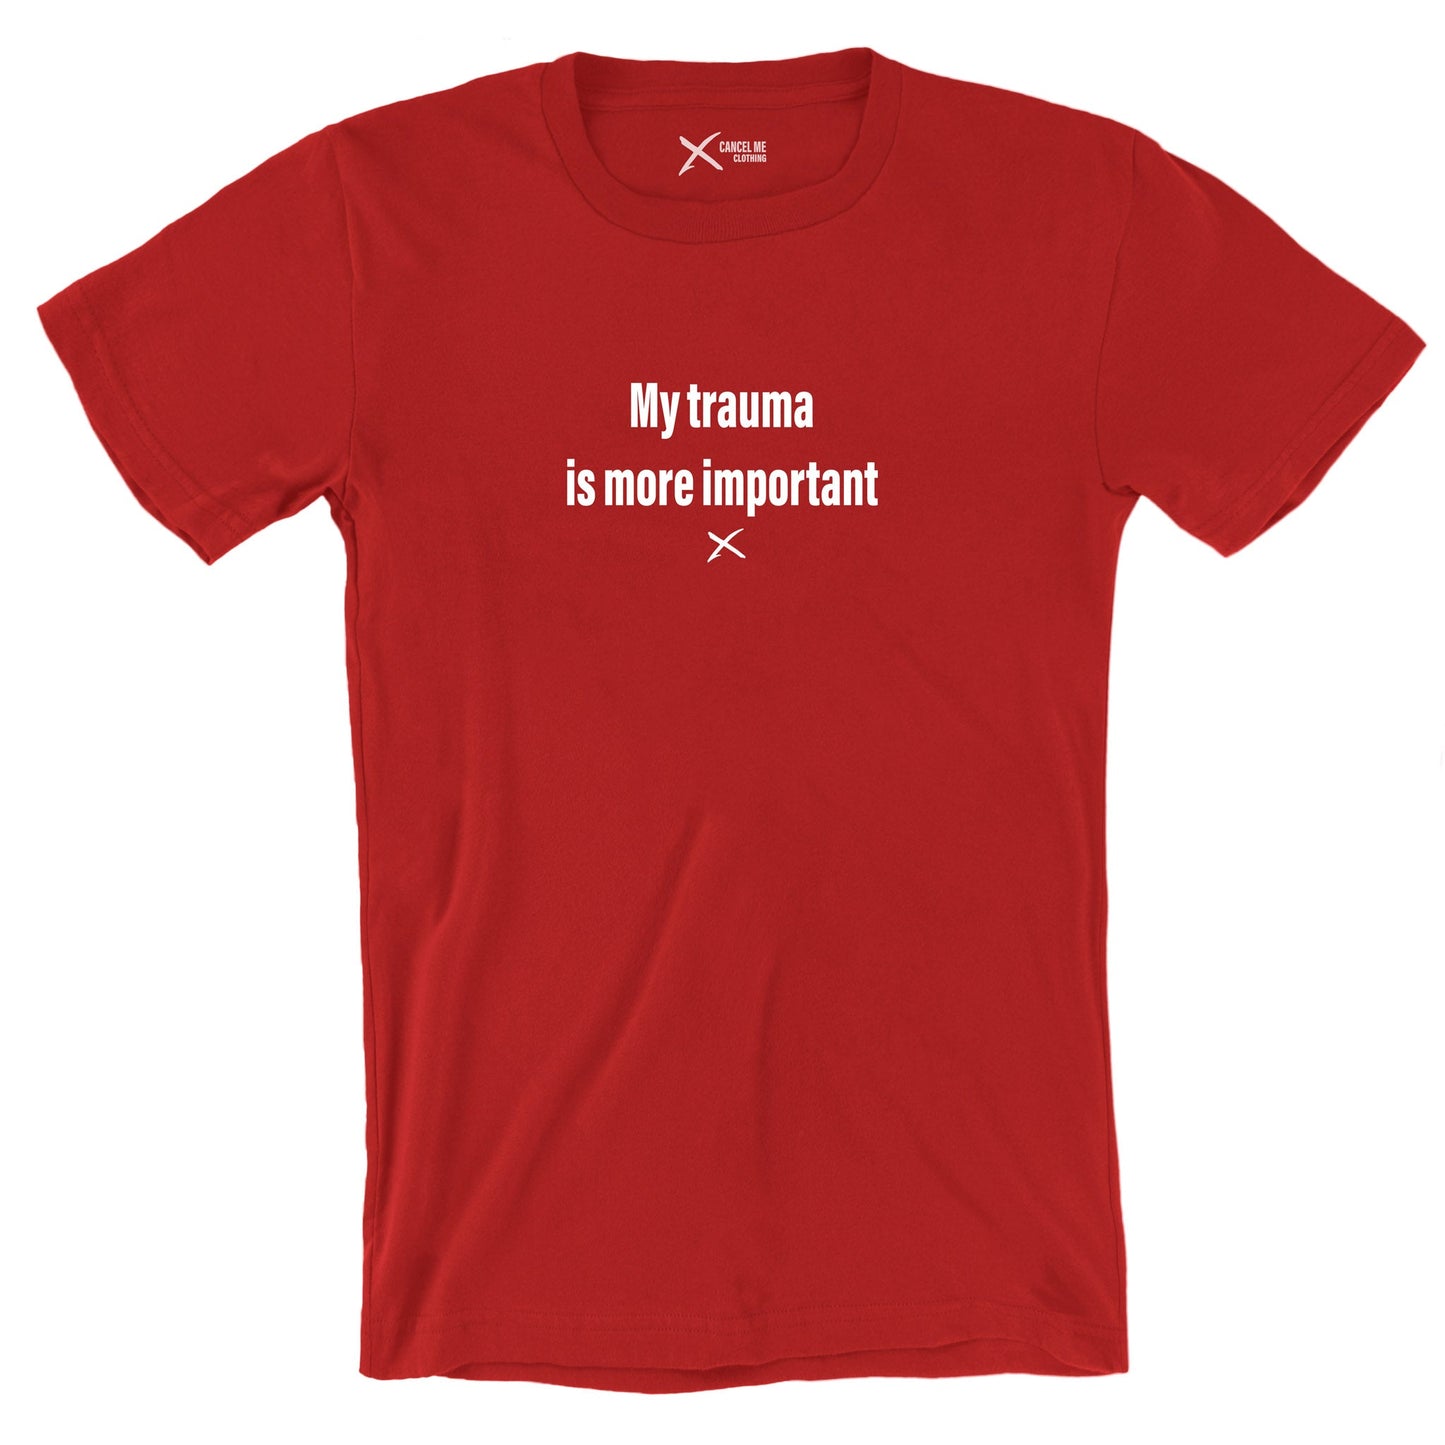 My trauma is more important - Shirt